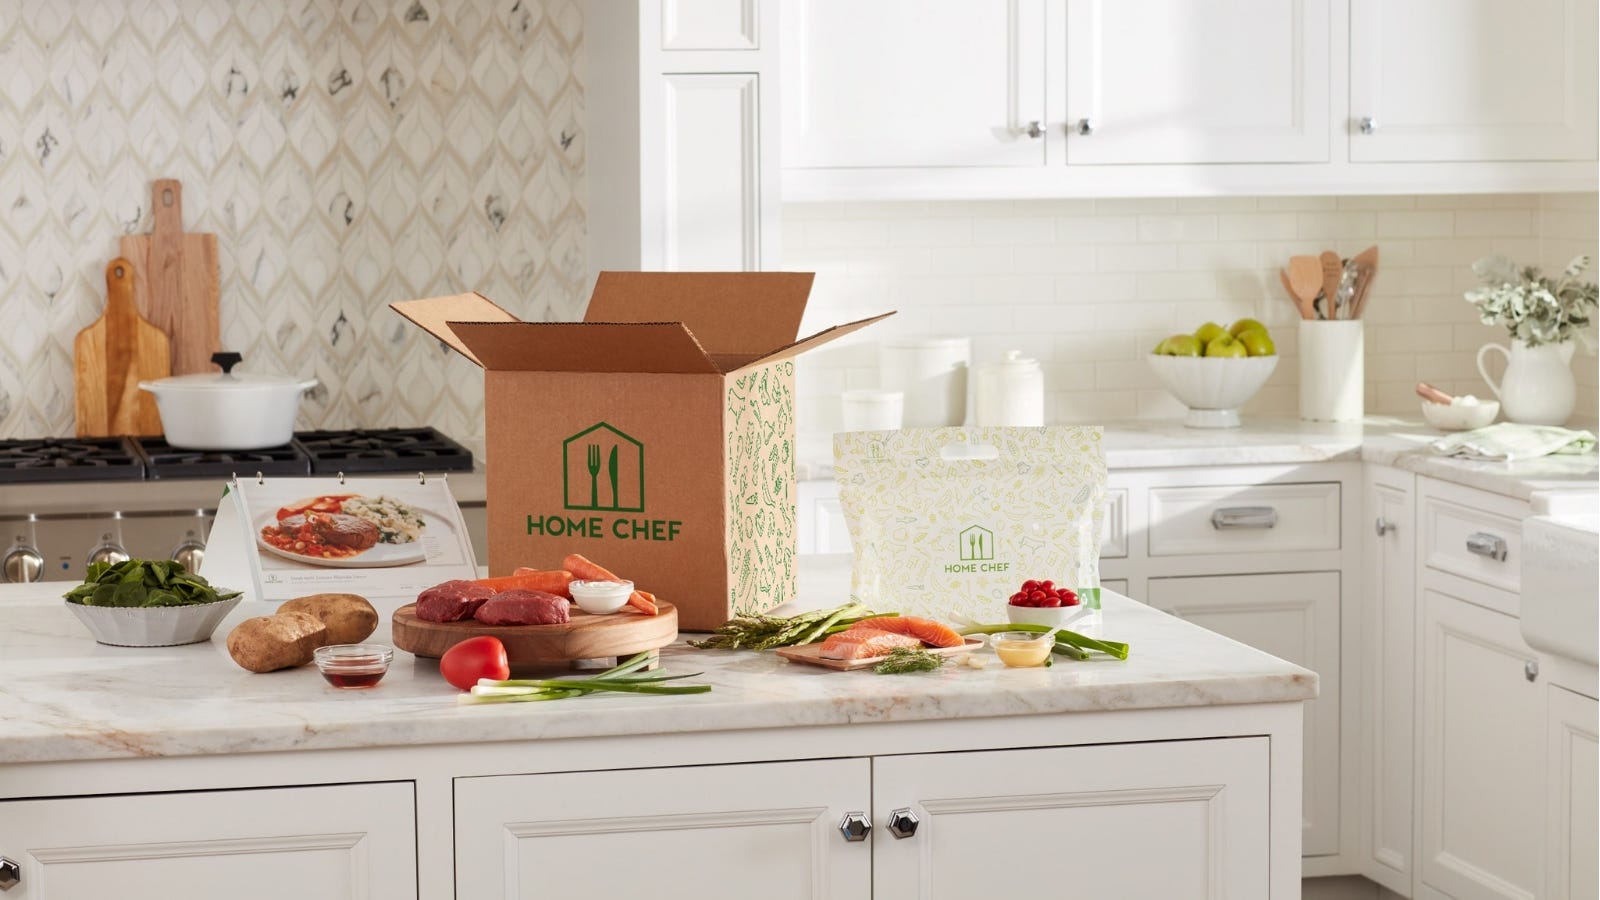 Home Chef is the best meal kit service—and now you can save on a subscription